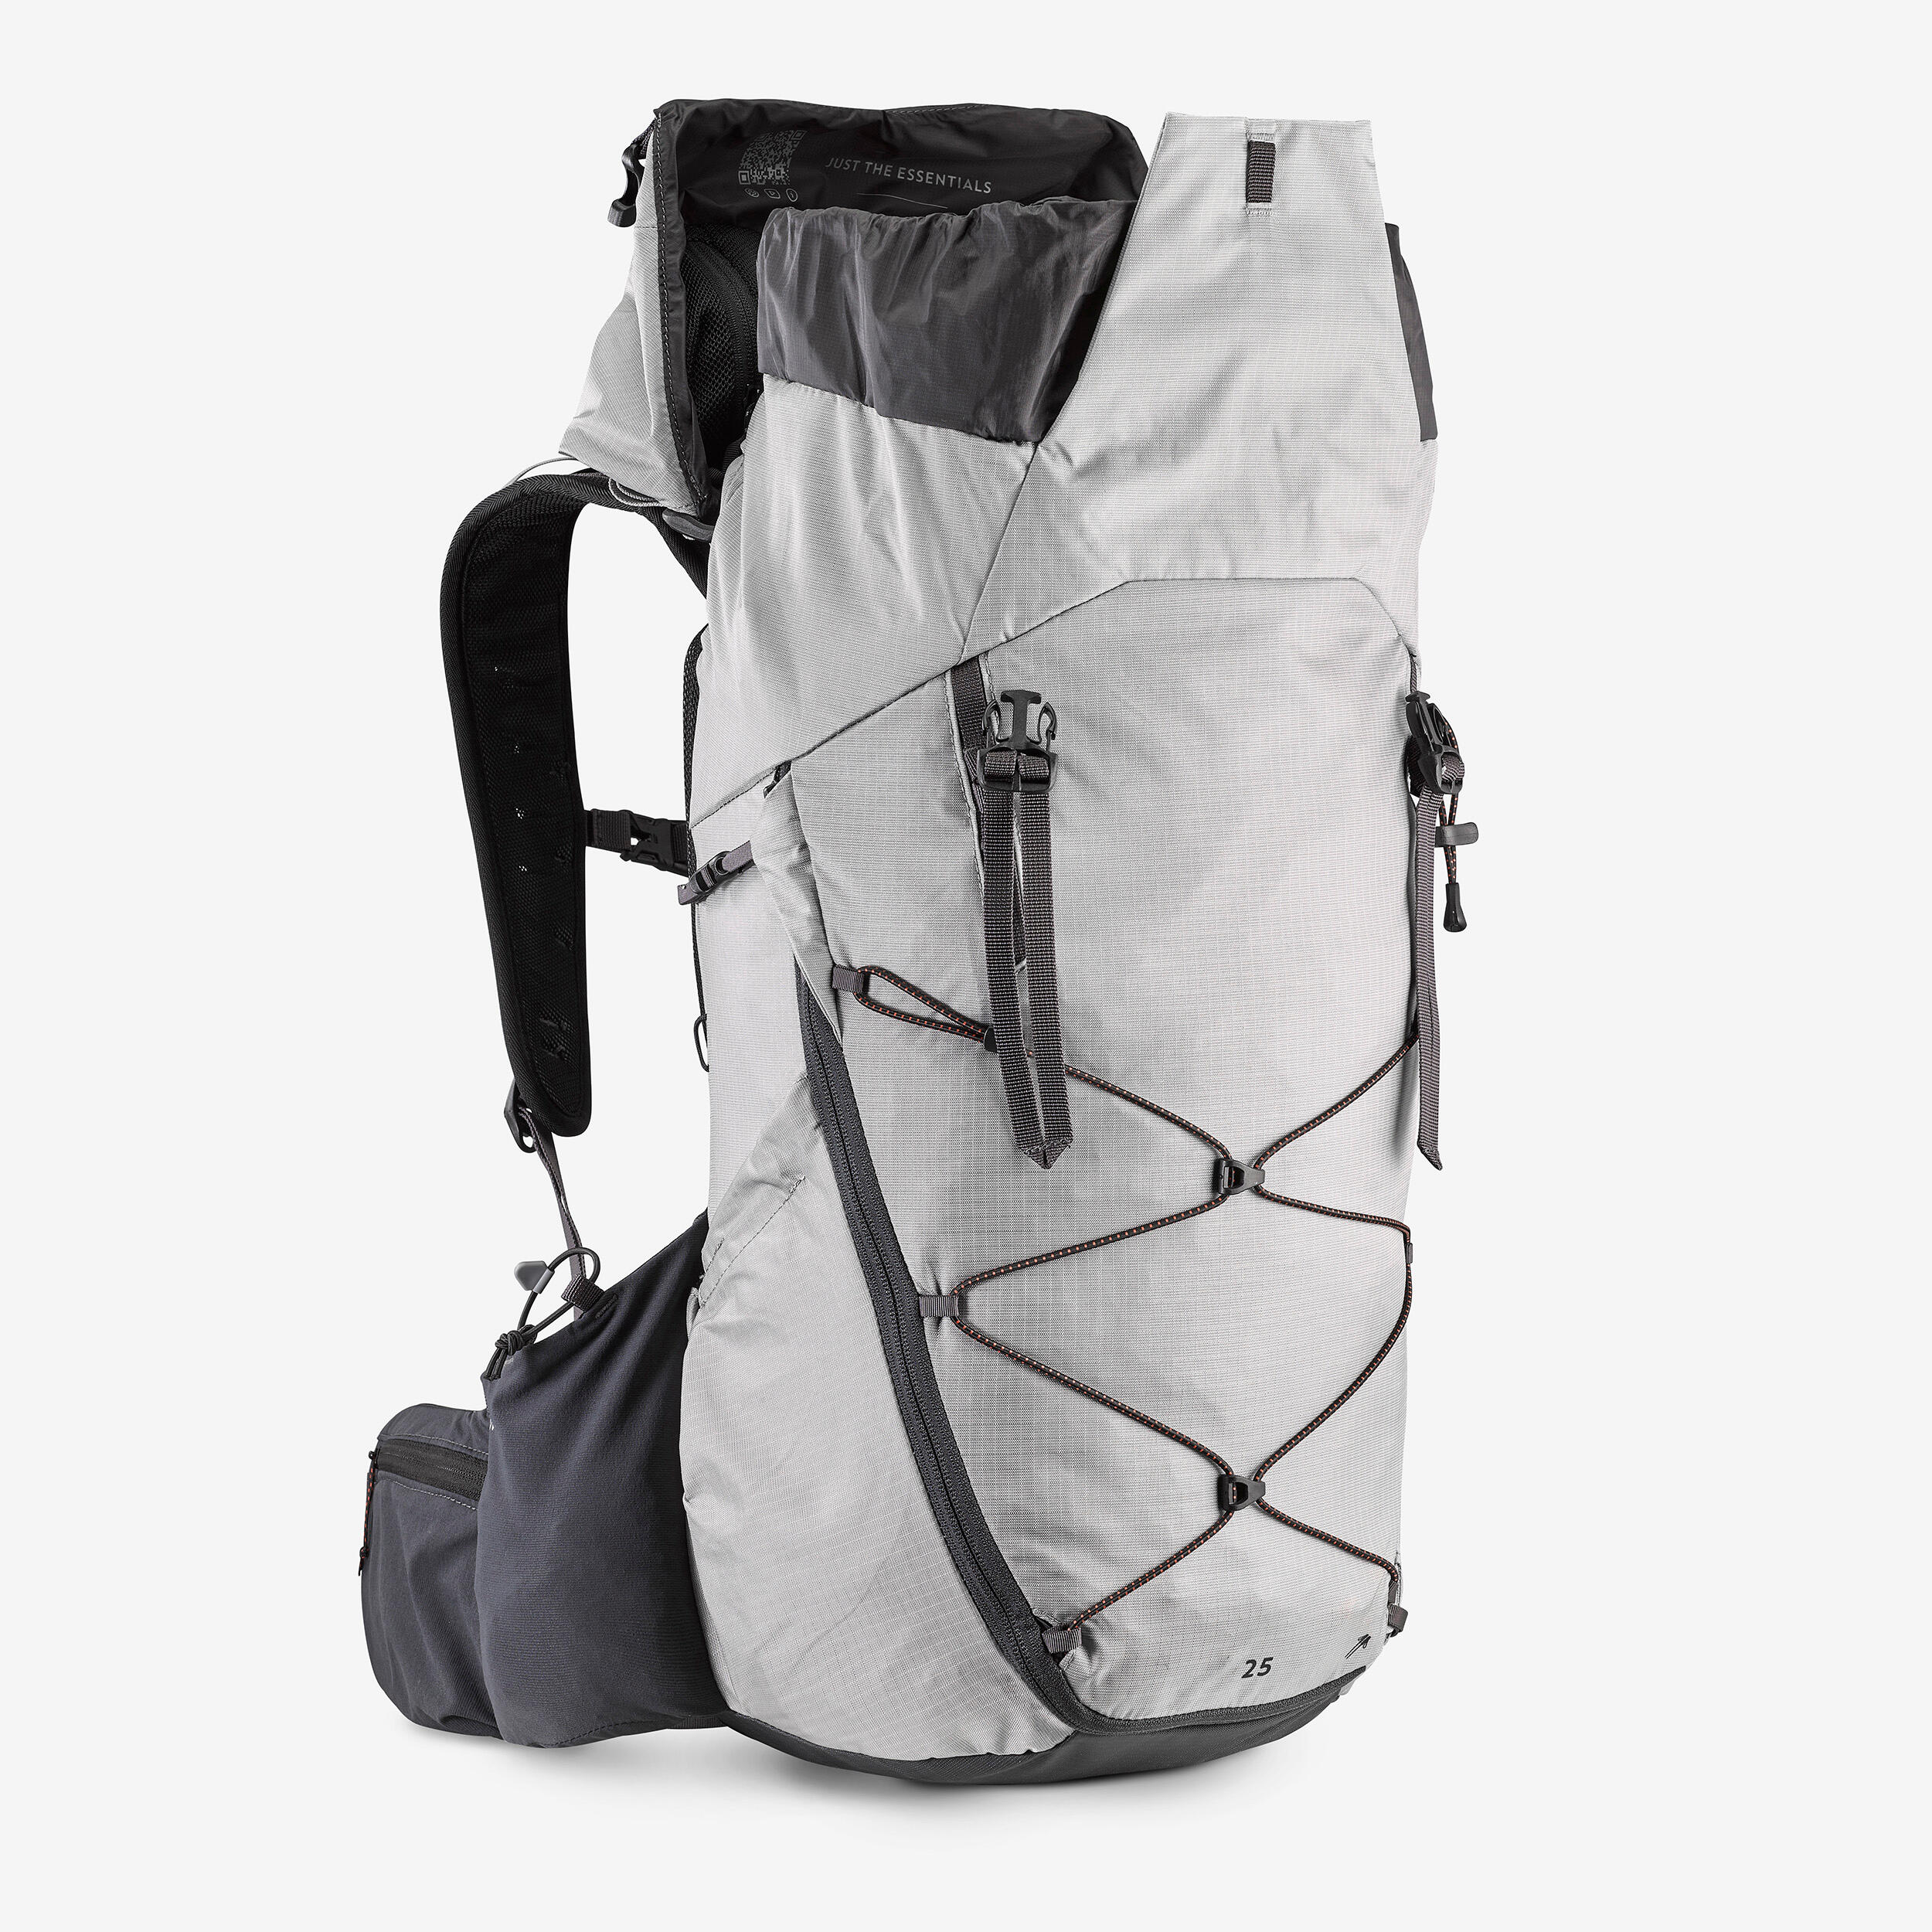 Mountain hiking backpack 25L - MH900 6/18